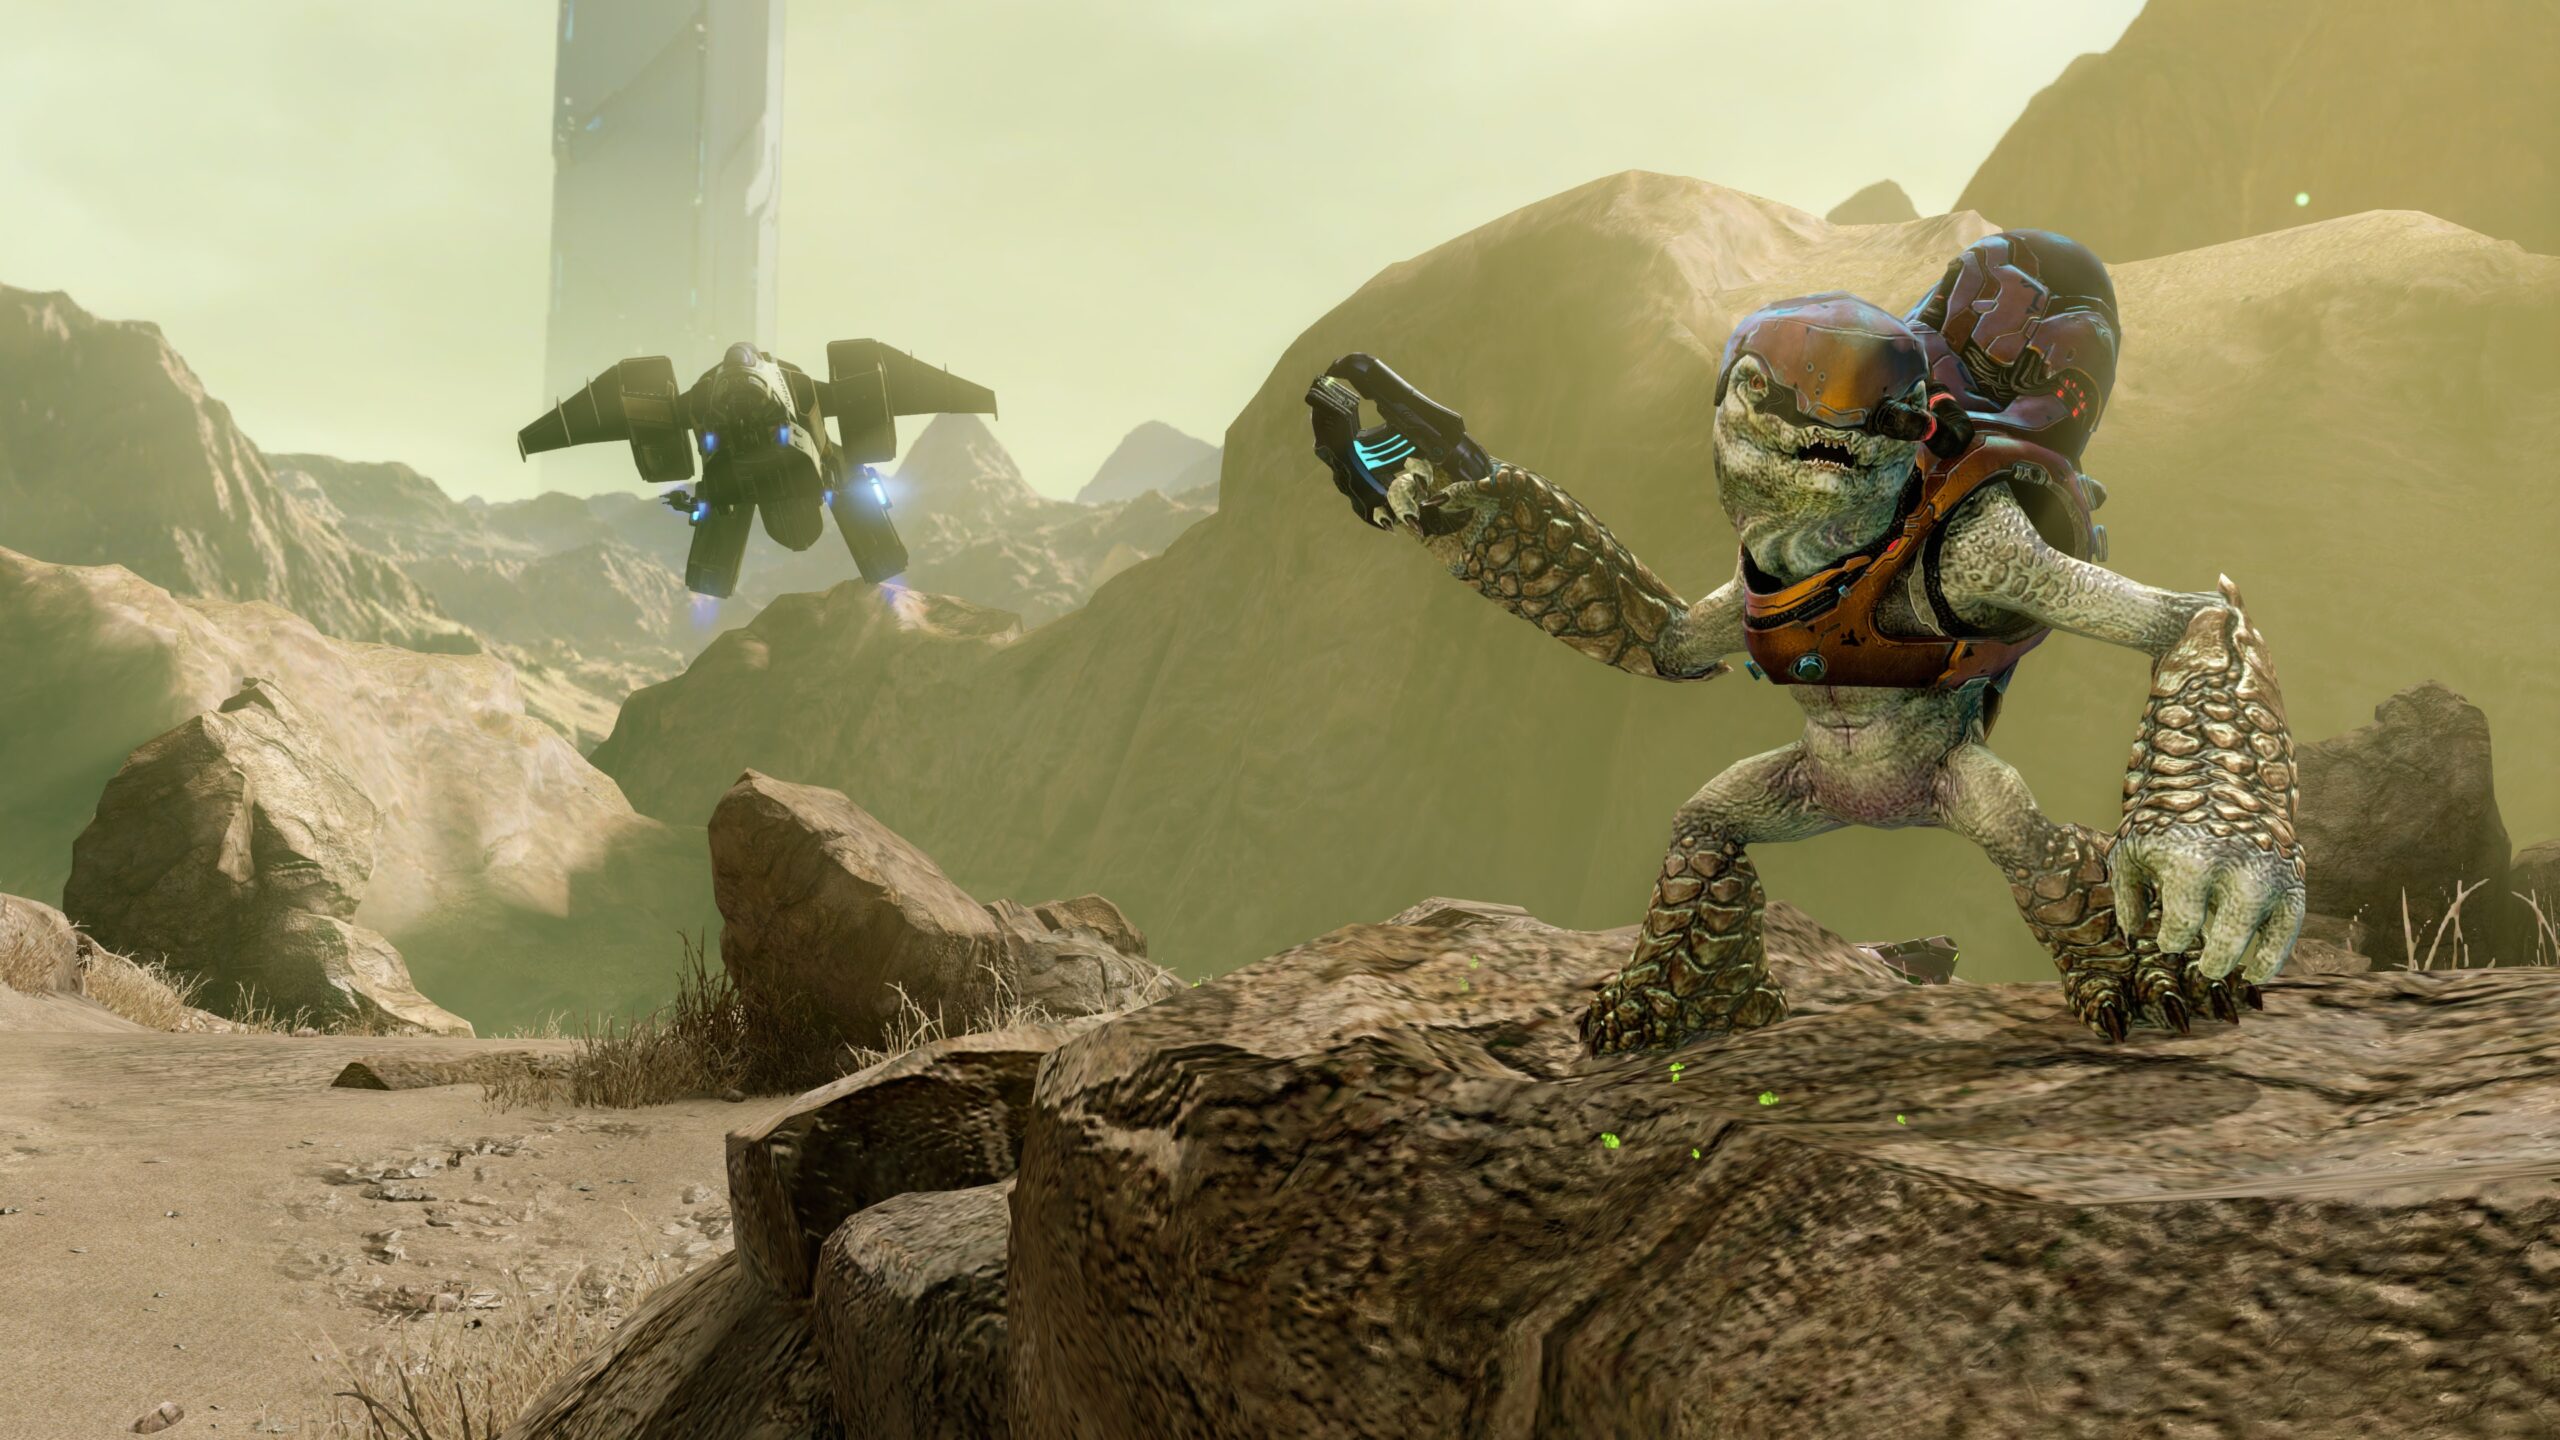 Halo 4 Spartan Ops in-game screenshot of a Grunt gesturing towards a Pelican dropship